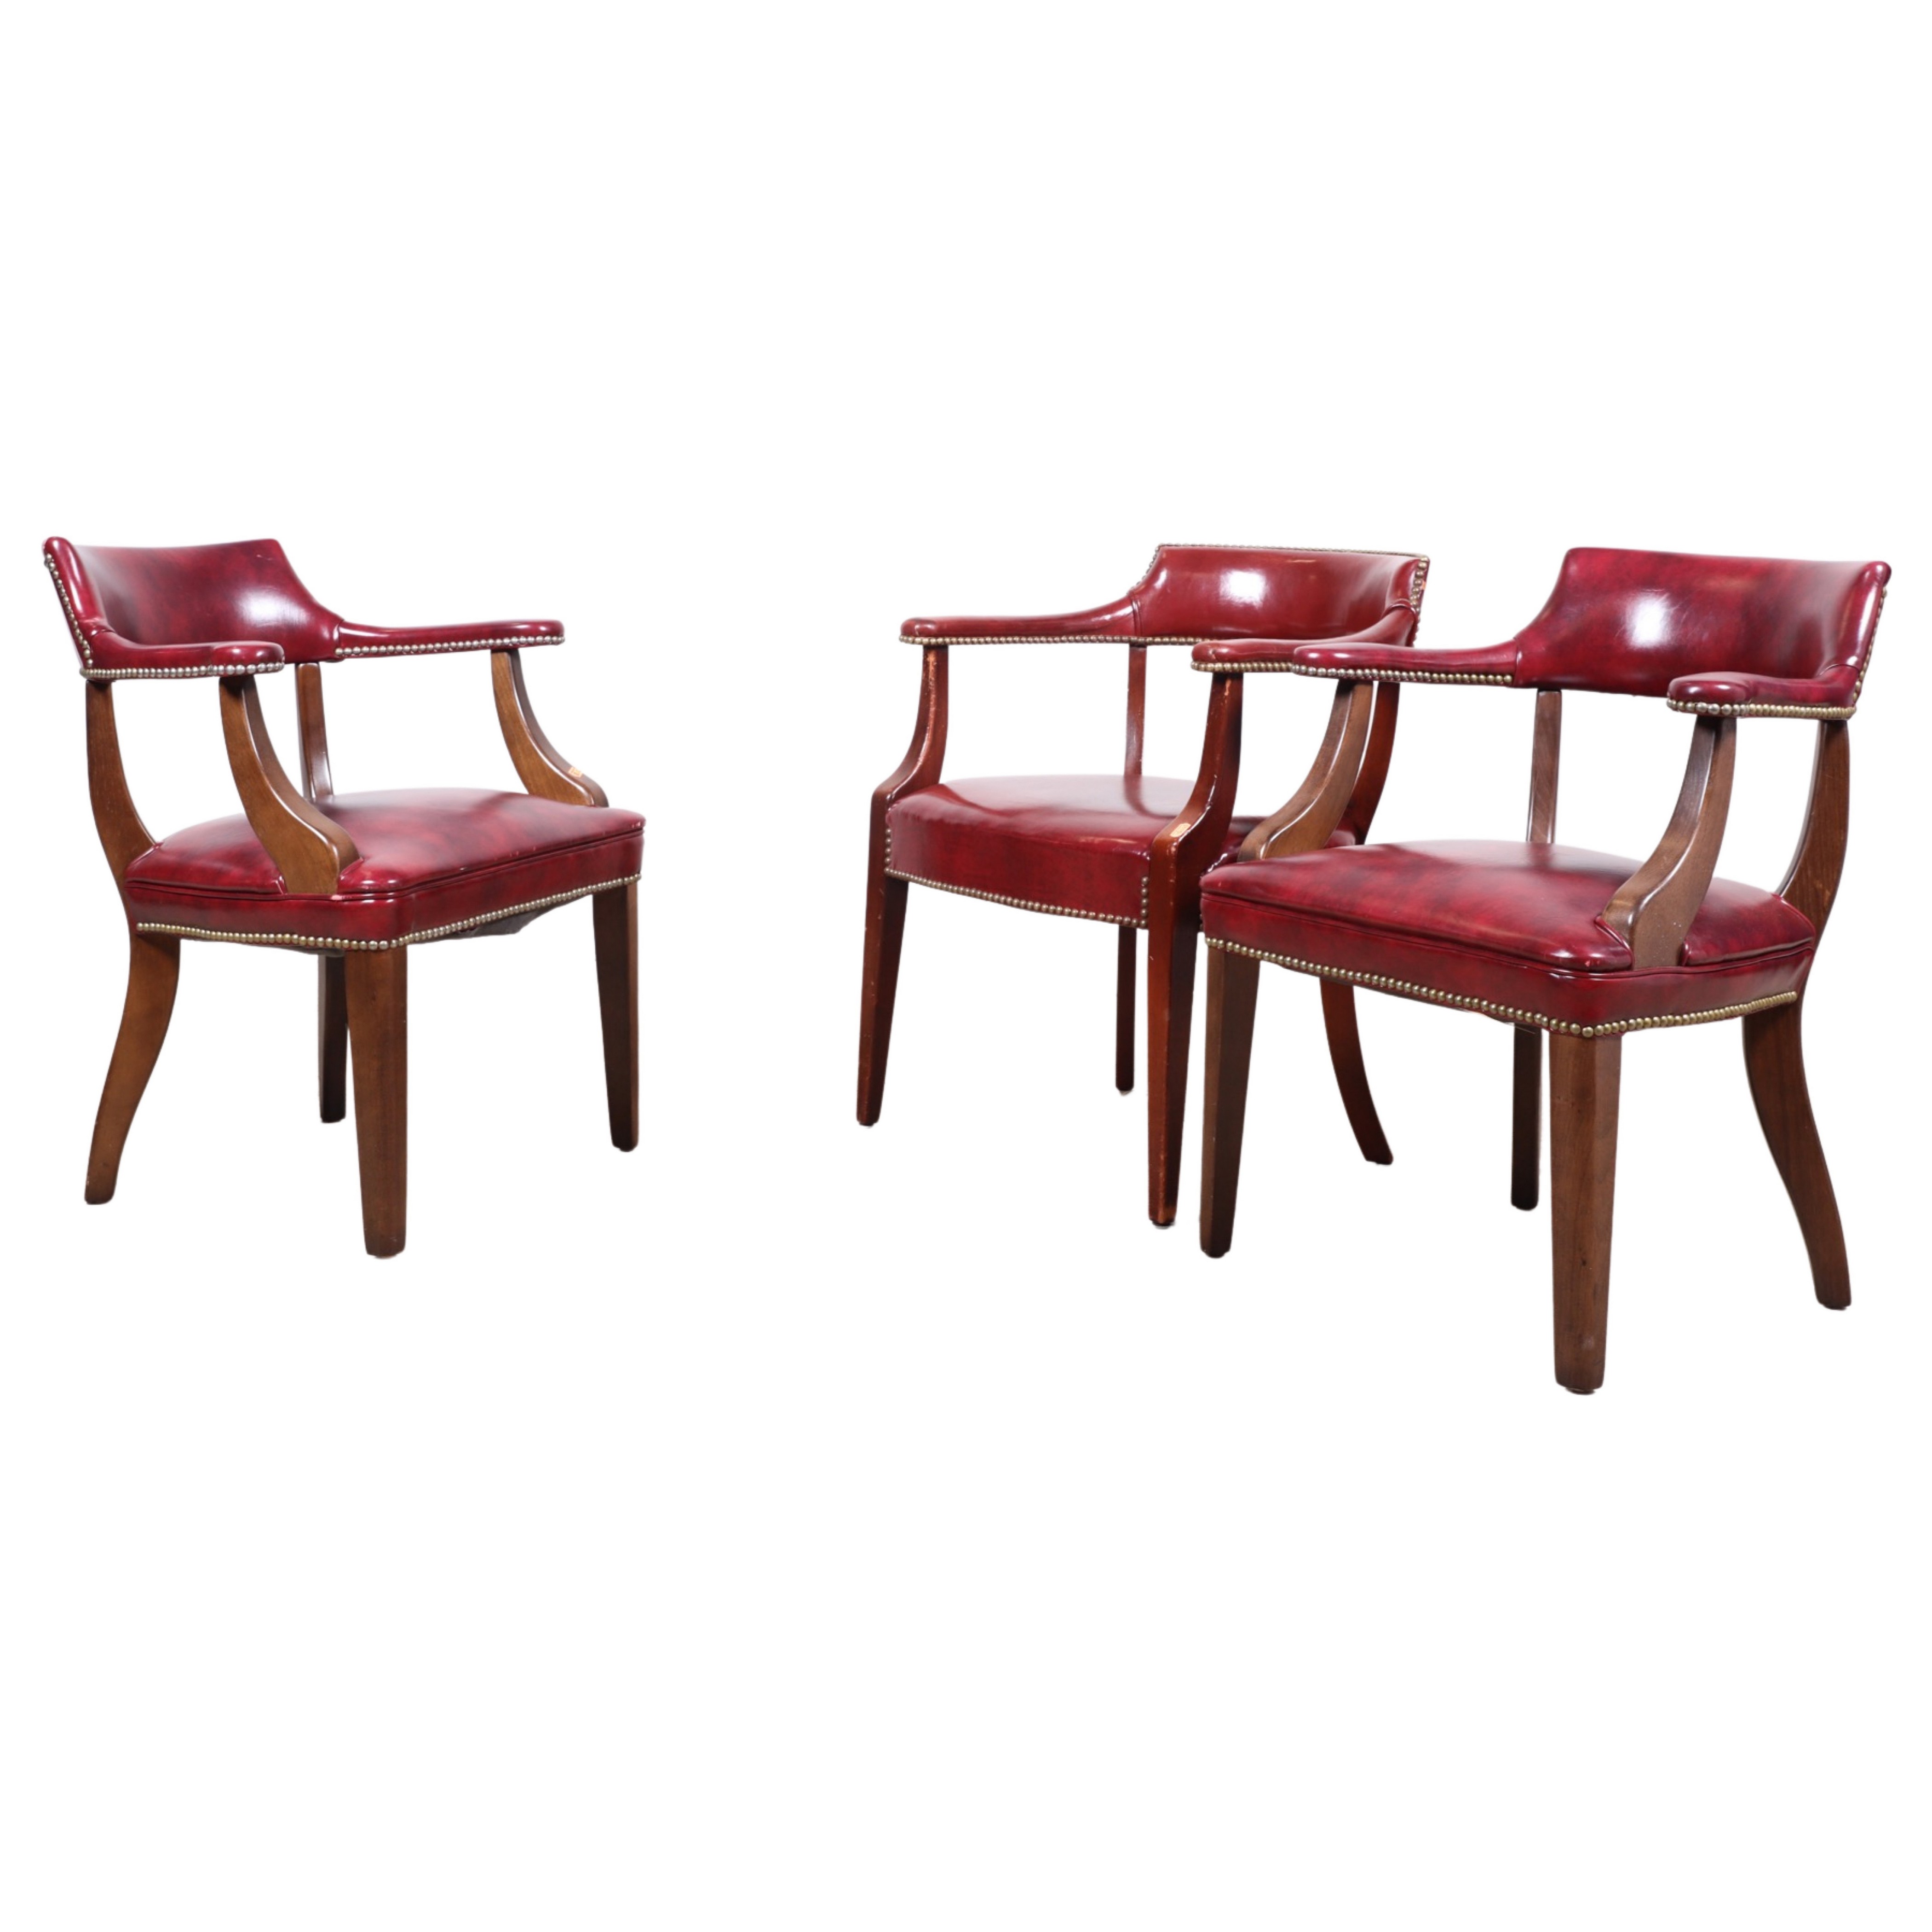 (3) leather office chairs, red leather